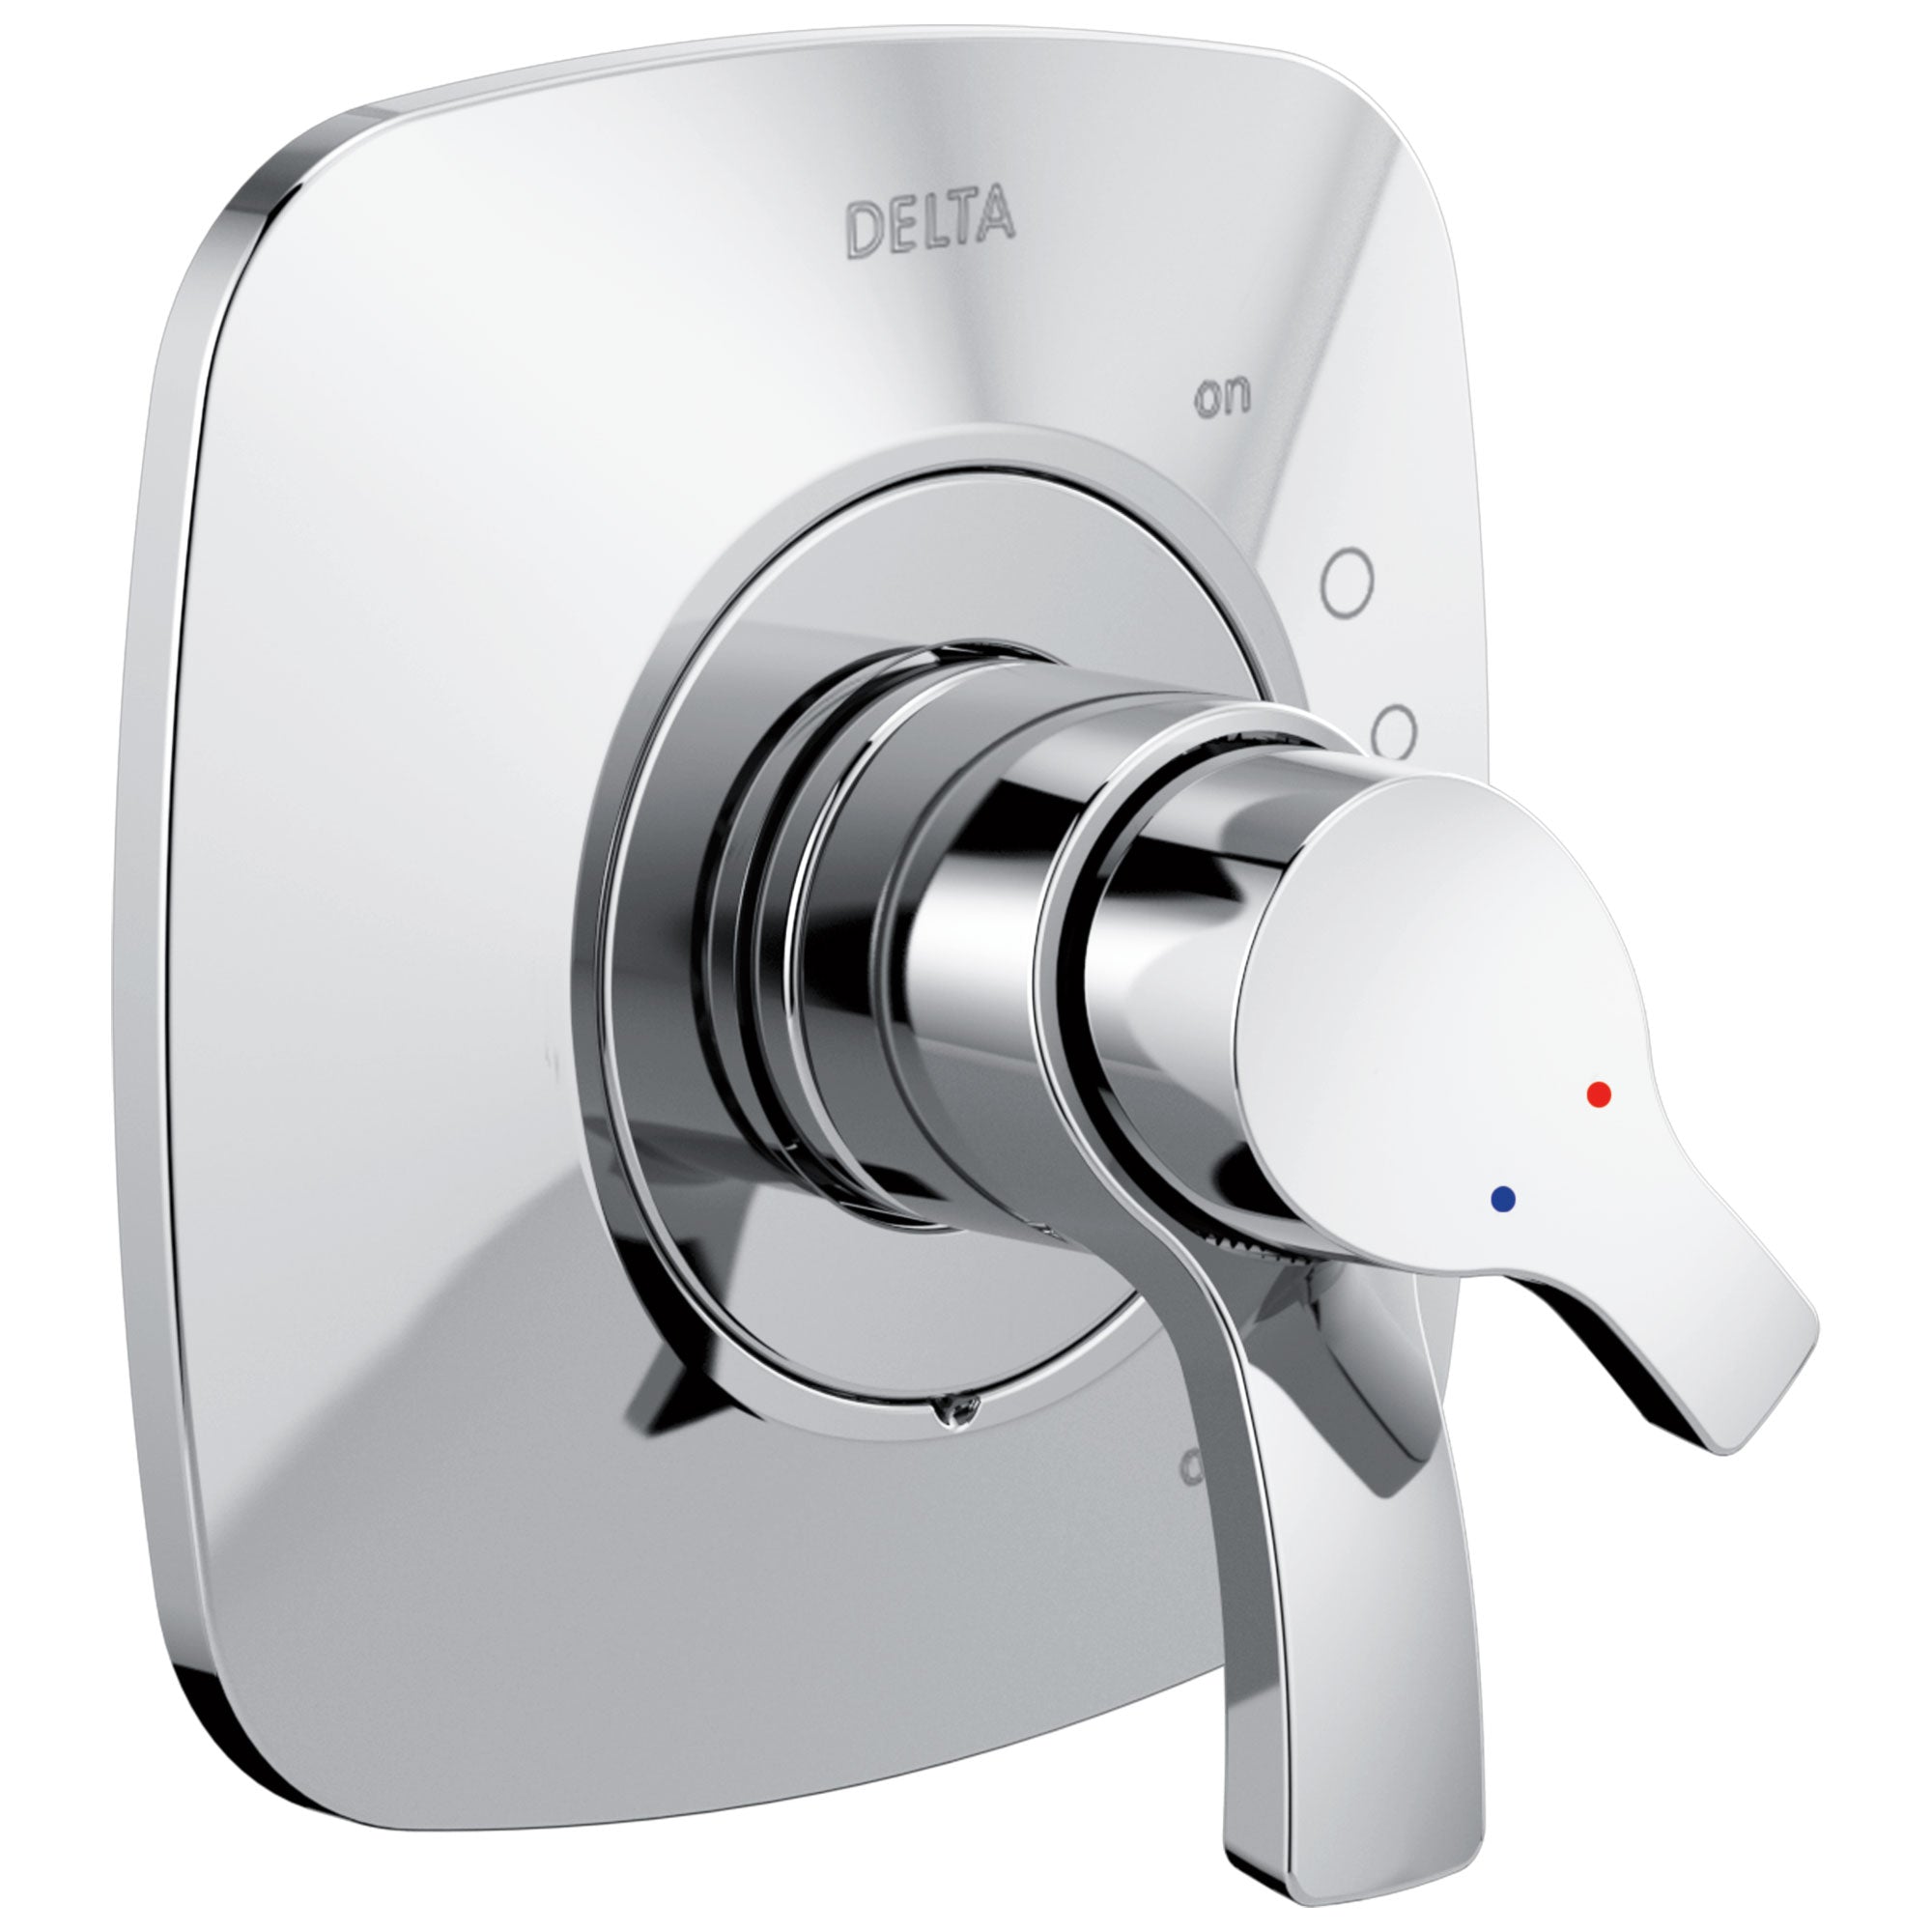 Delta Tesla Collection Chrome Monitor 17 Dual Temperature and Water Pressure Shower Faucet Control Handle Includes Trim Kit and Valve with Stops D1983V